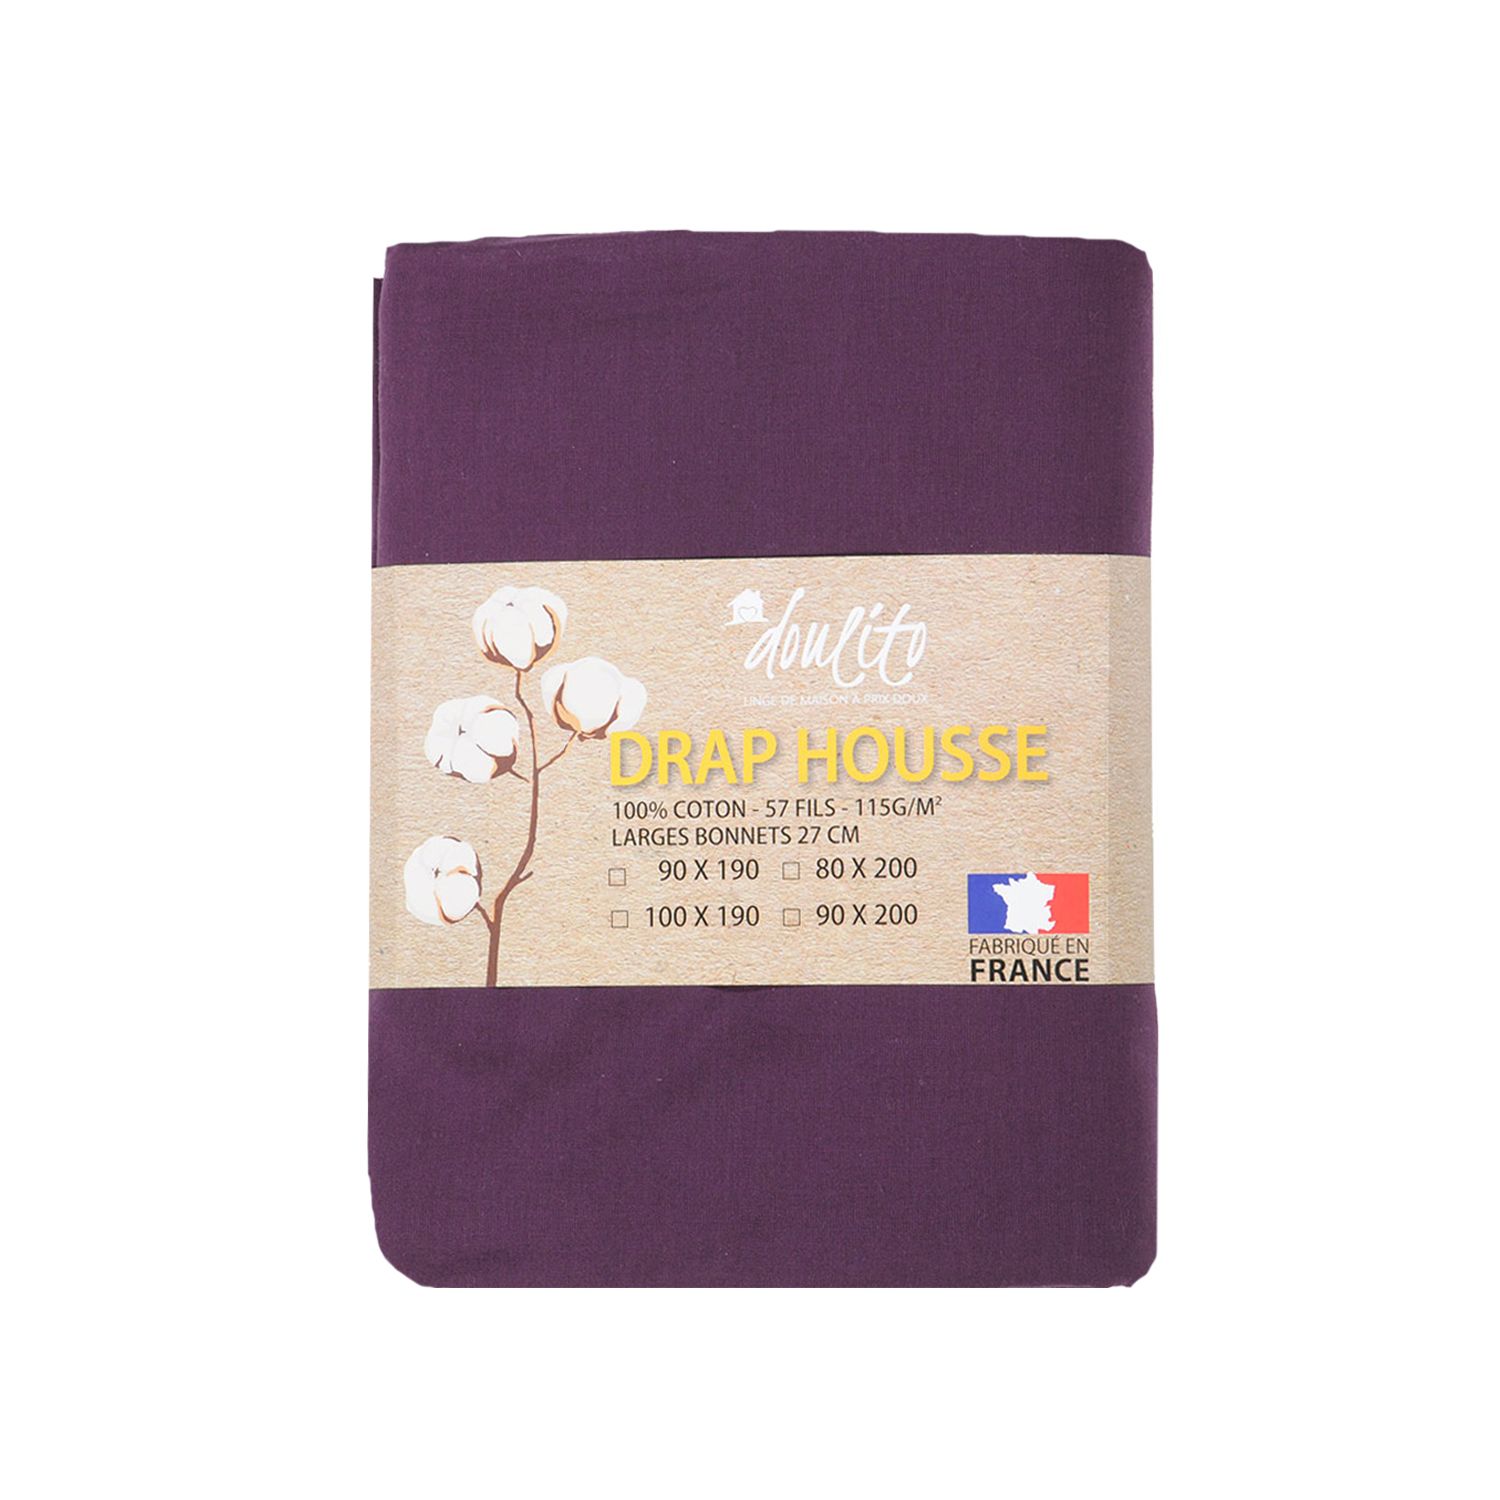 Drap housse Doulito - 80x200 cm - Made in France - Coton